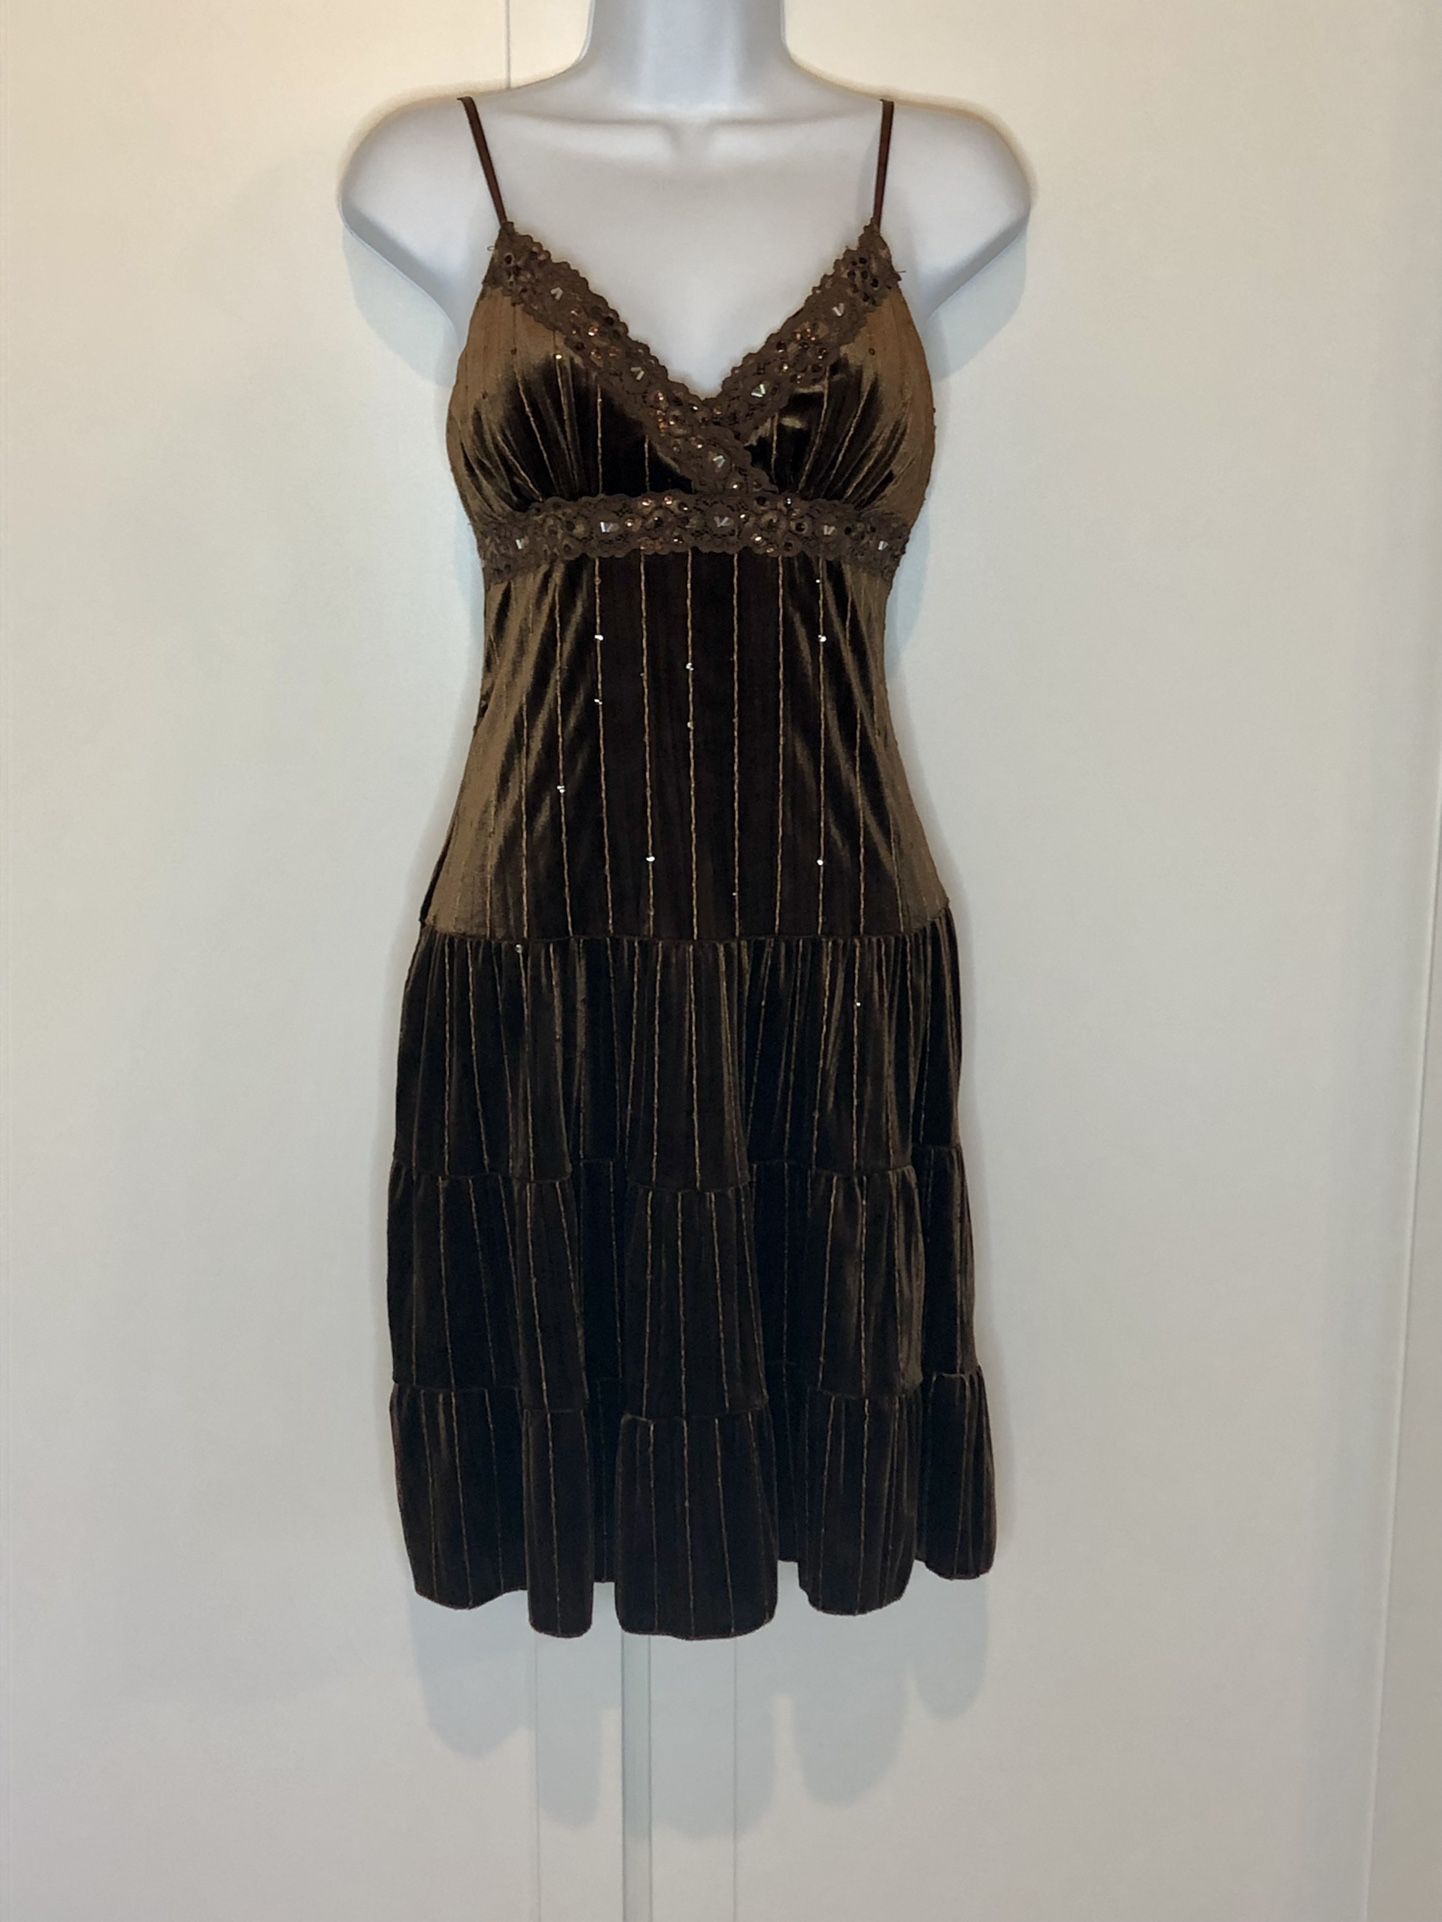 Brown City Triangles Dress with Sequins Size Small